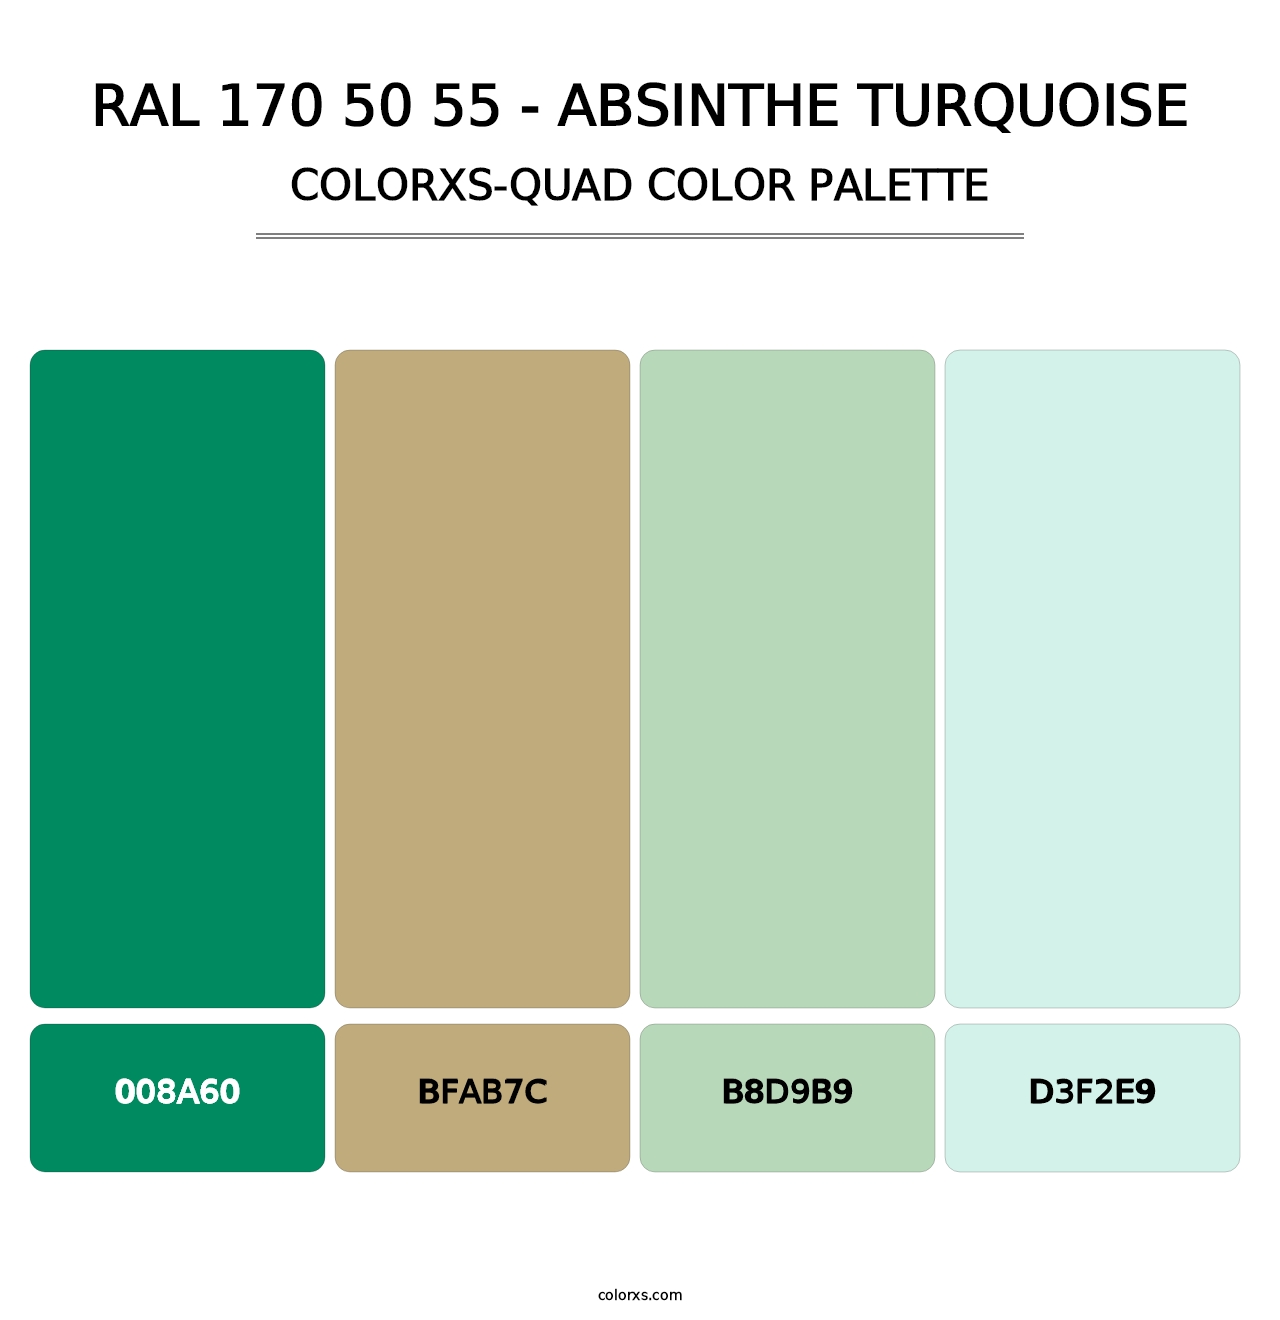 RAL 170 50 55 - Absinthe Turquoise - Colorxs Quad Palette